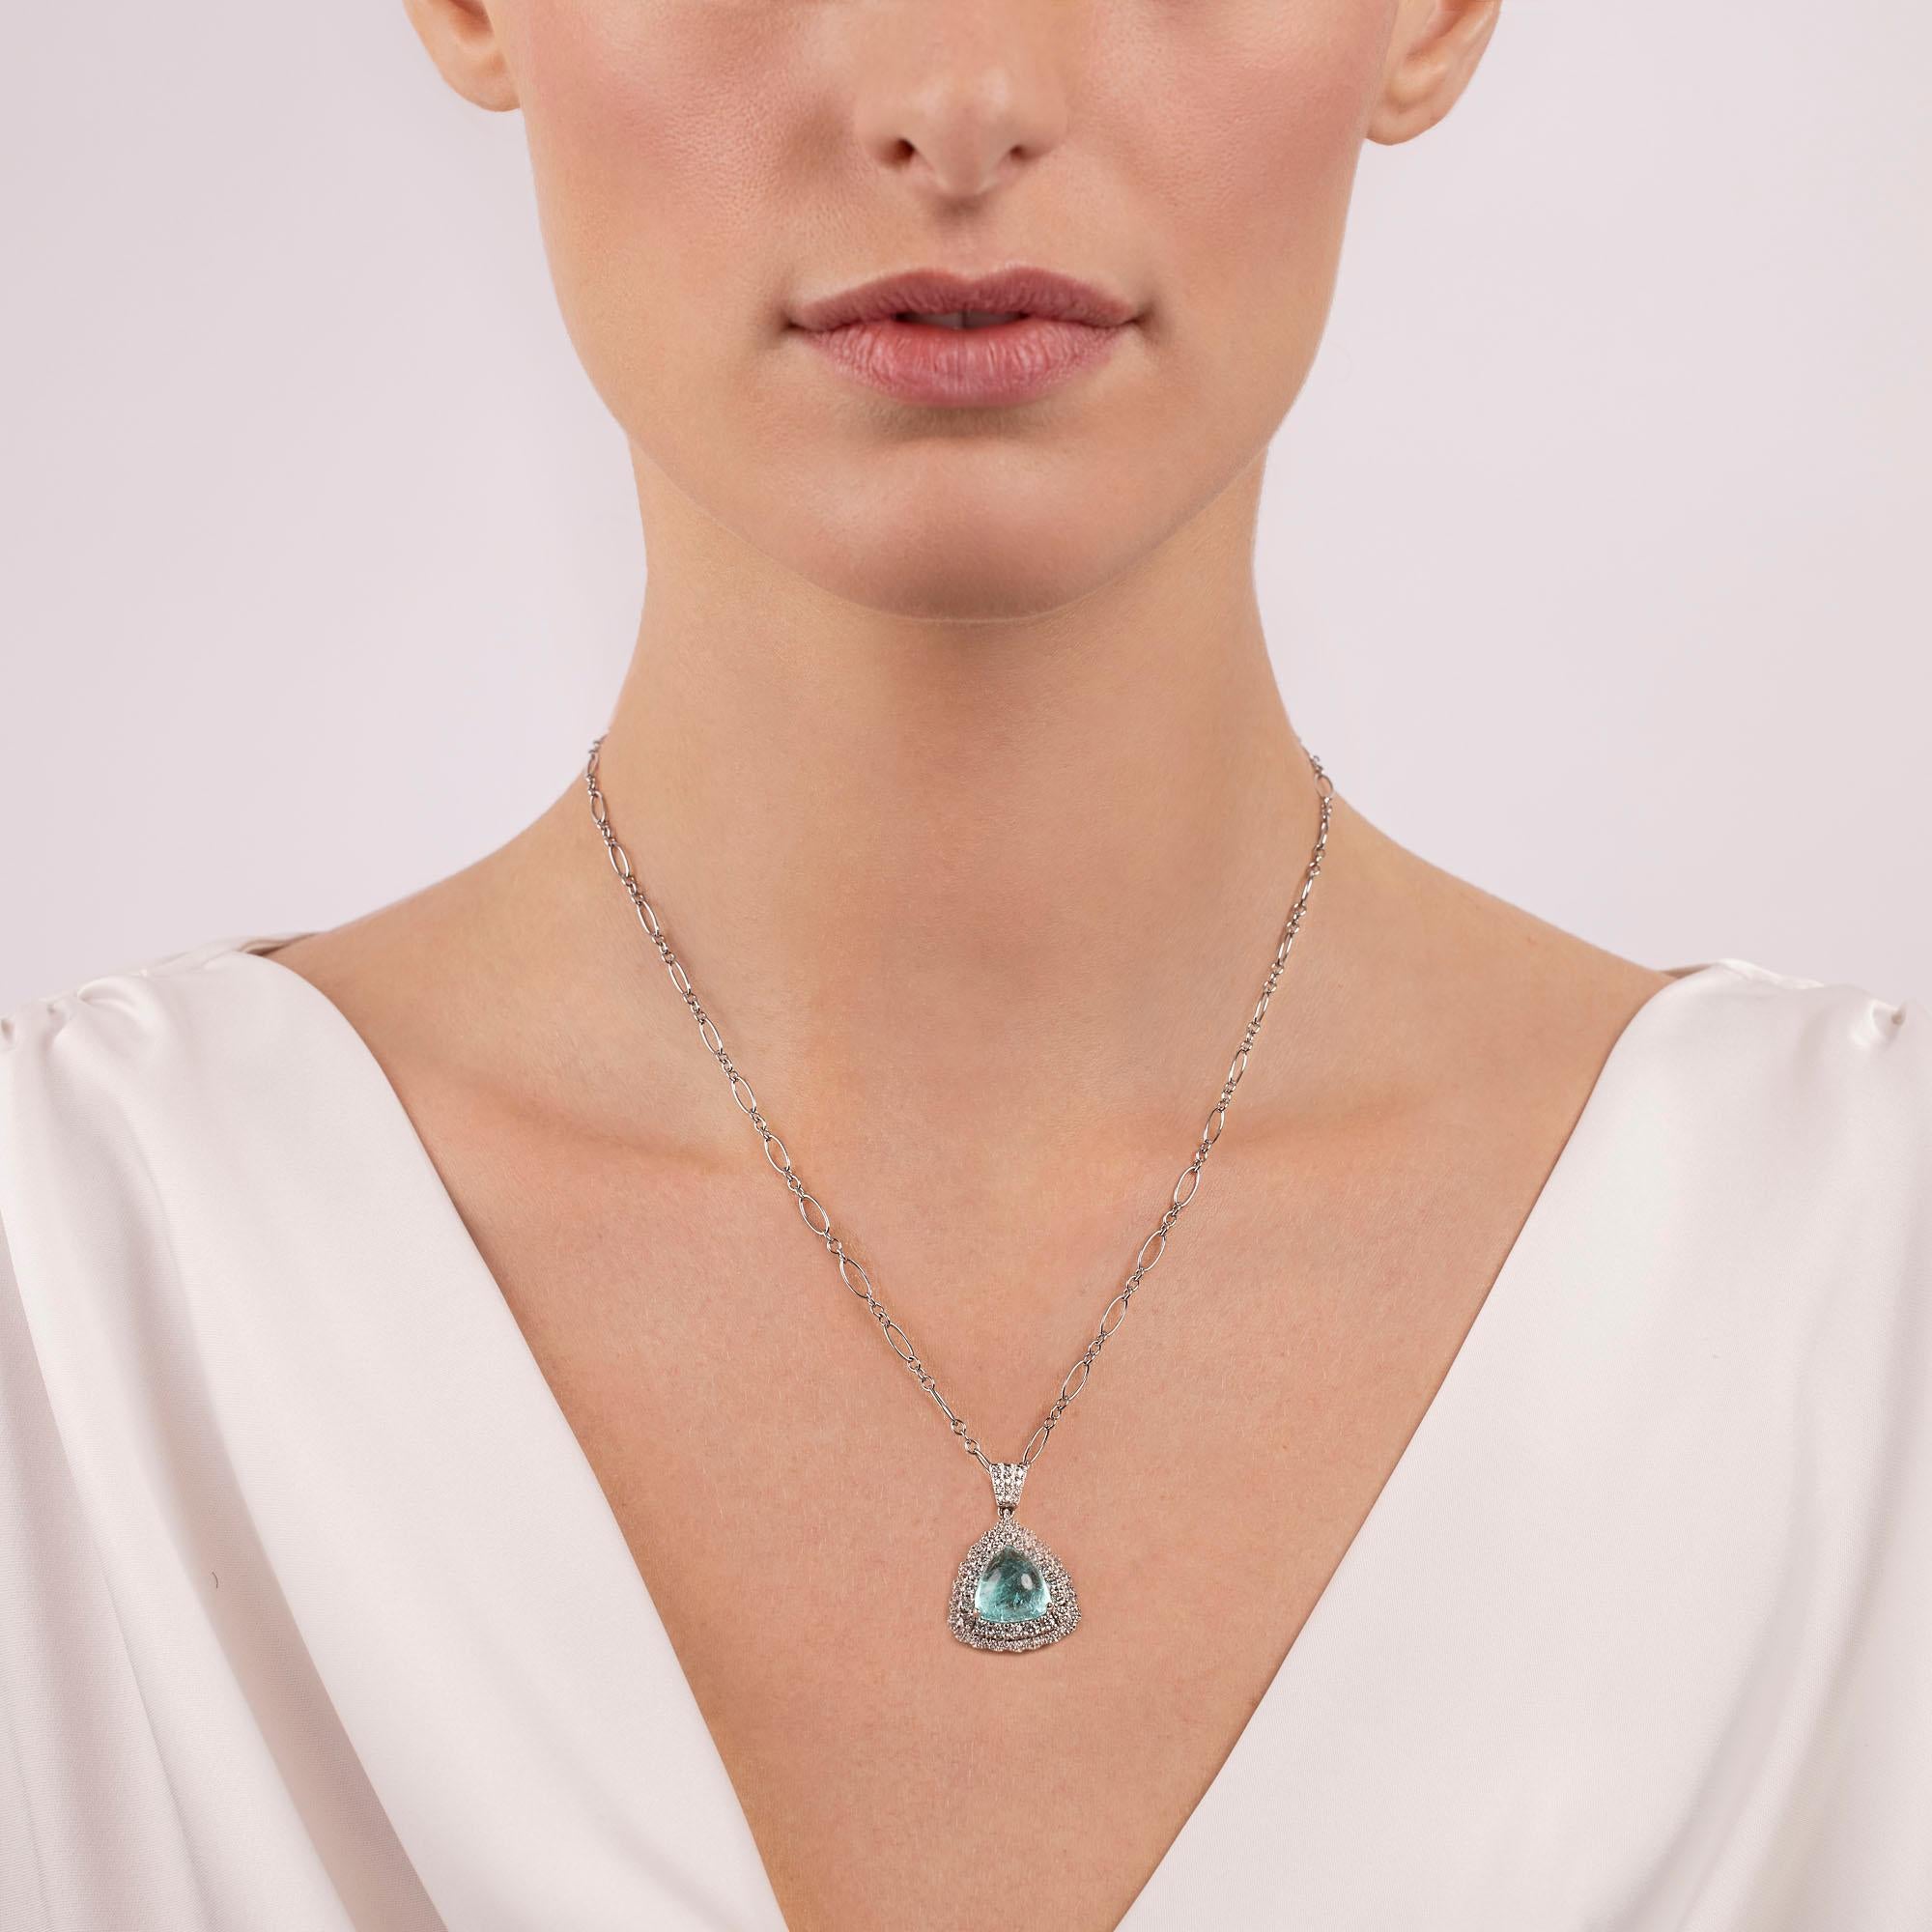 An illuminating trillion shape Paraiba cabochon rests at the center of our Prism Necklace. Traced by two rows of glittering diamonds, the pendant is suspended from a tasteful 18